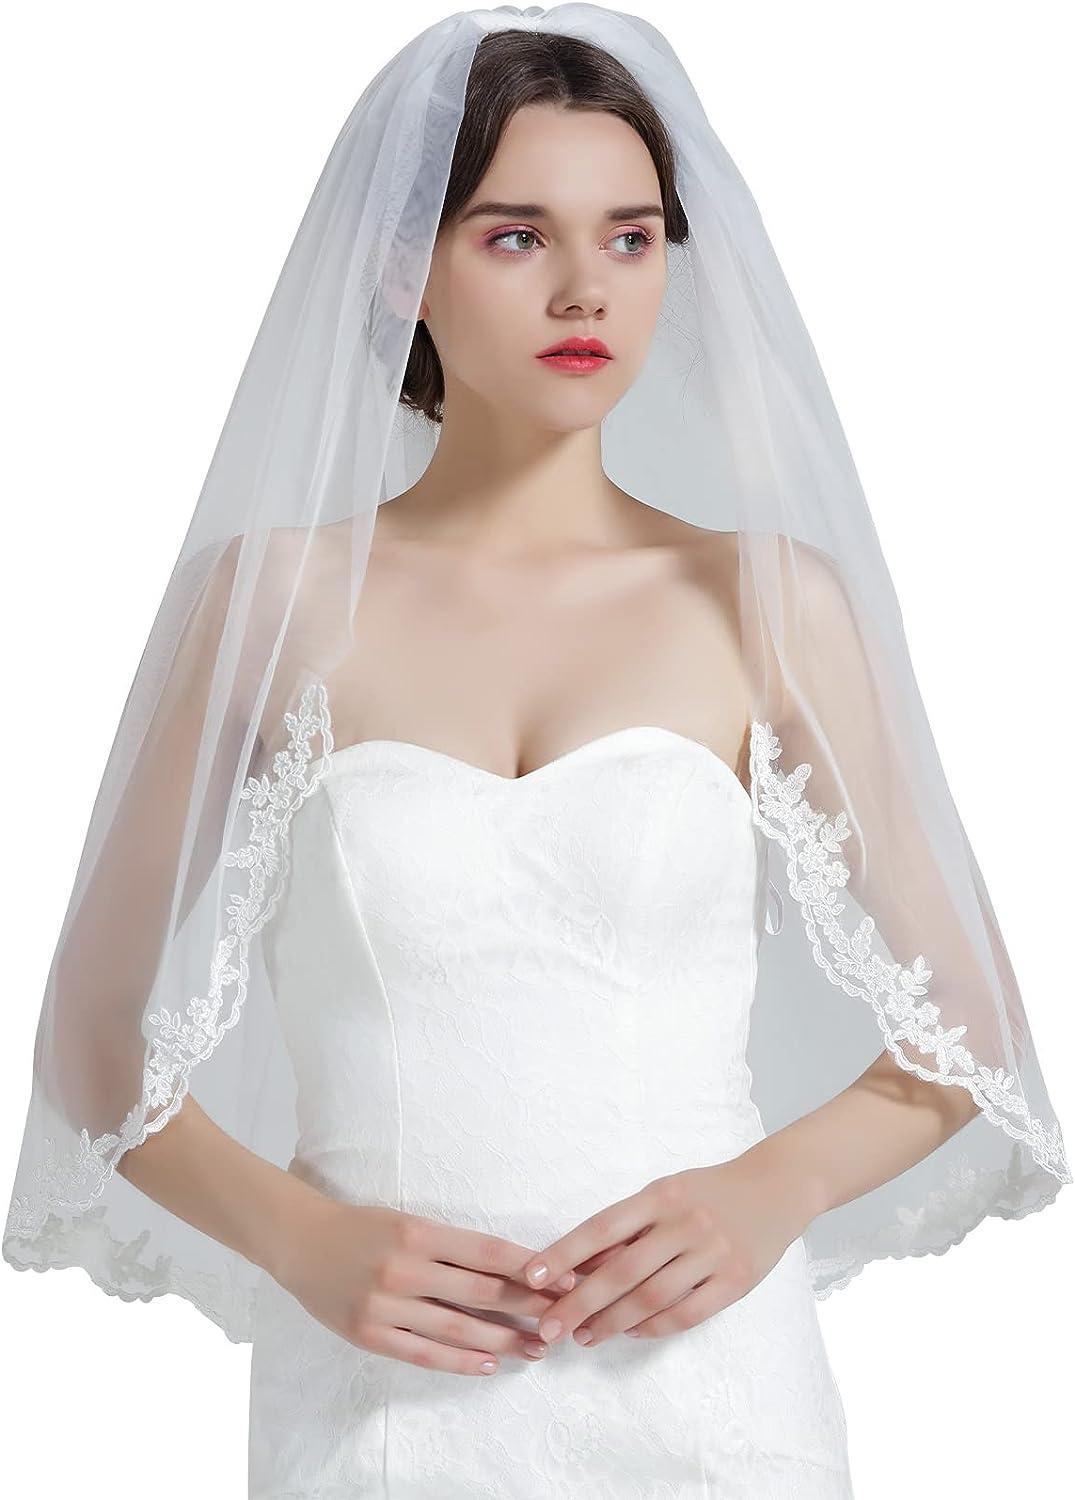 Bridal Wedding Veil 1 Layer Simple Ivory White With Metal Comb Short Long Lace Embroidery